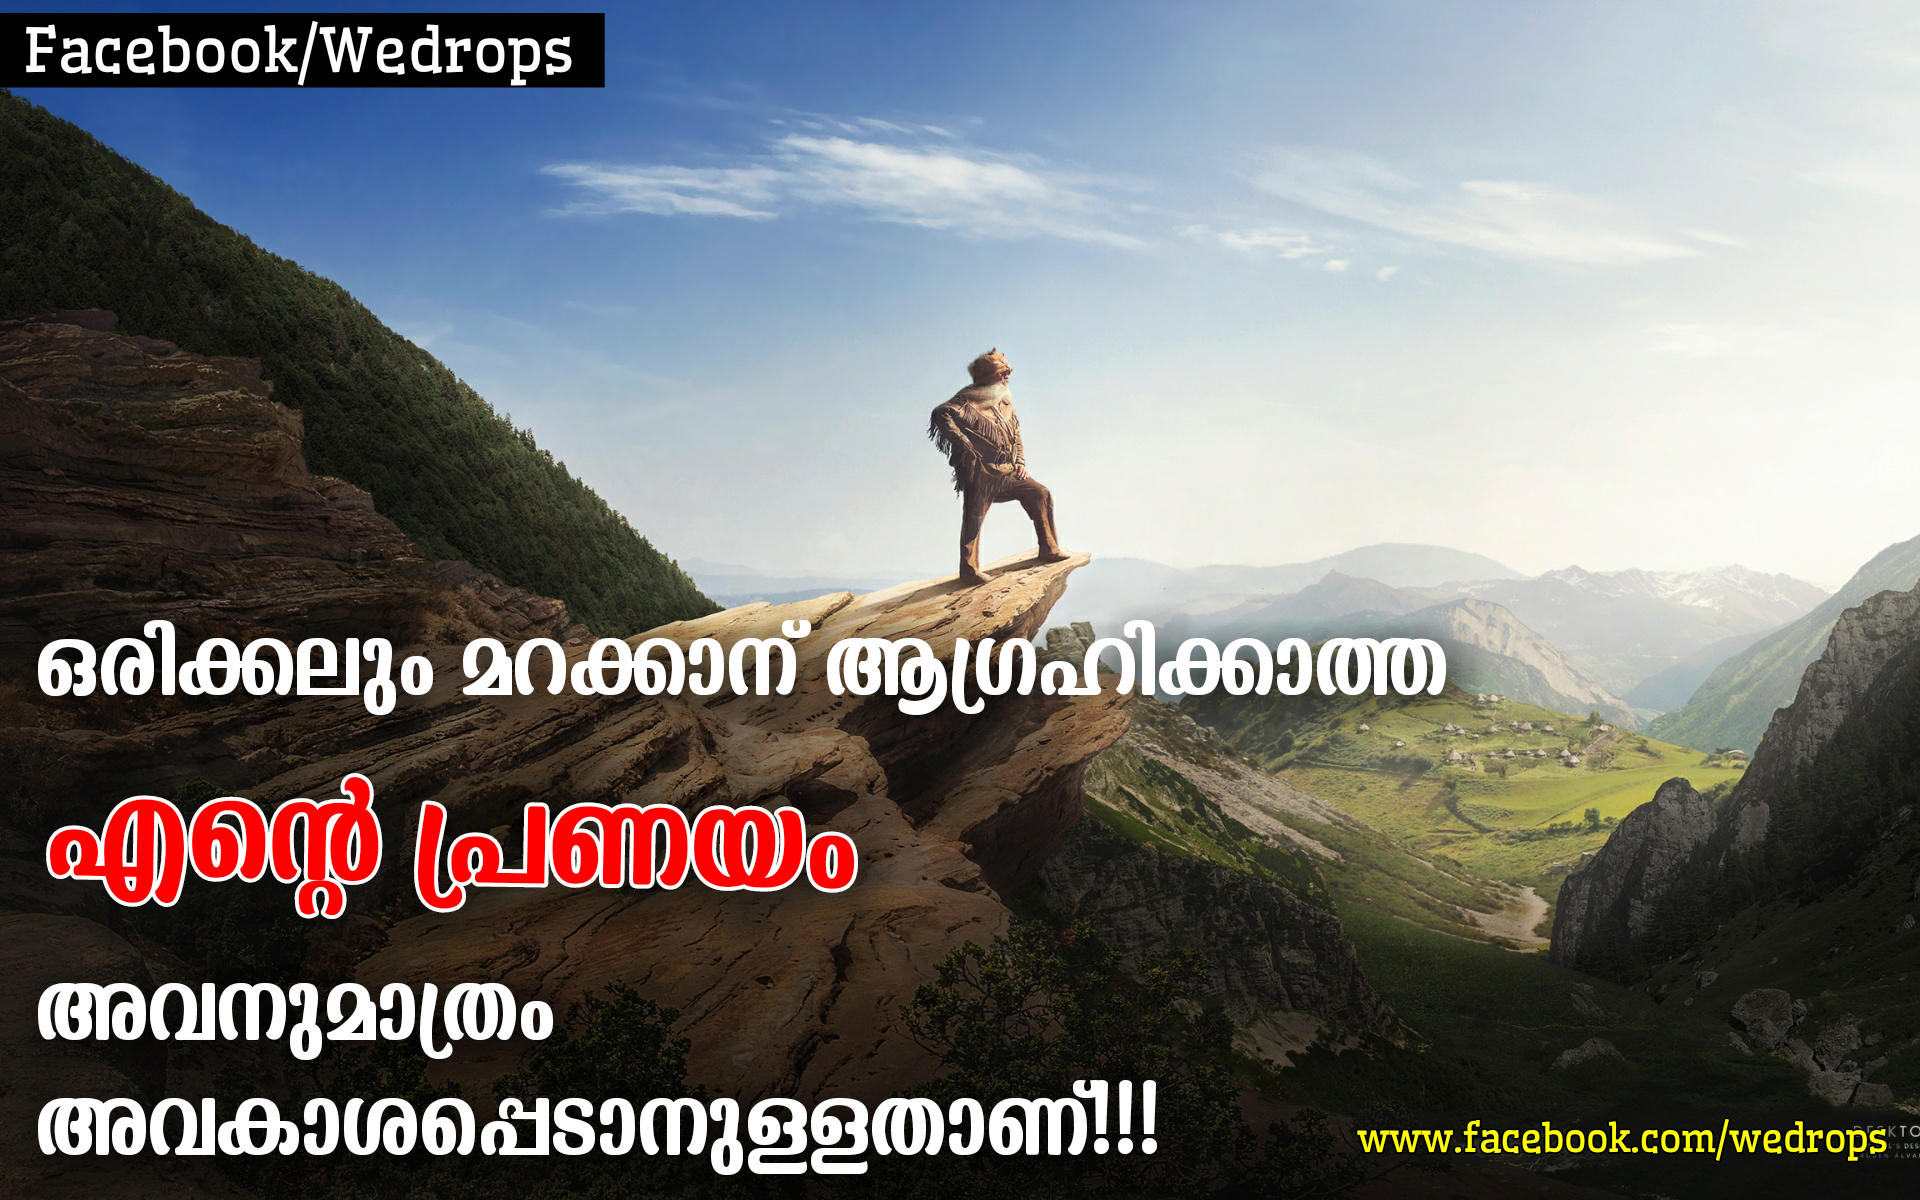 Malayalam Quotes and Scraps